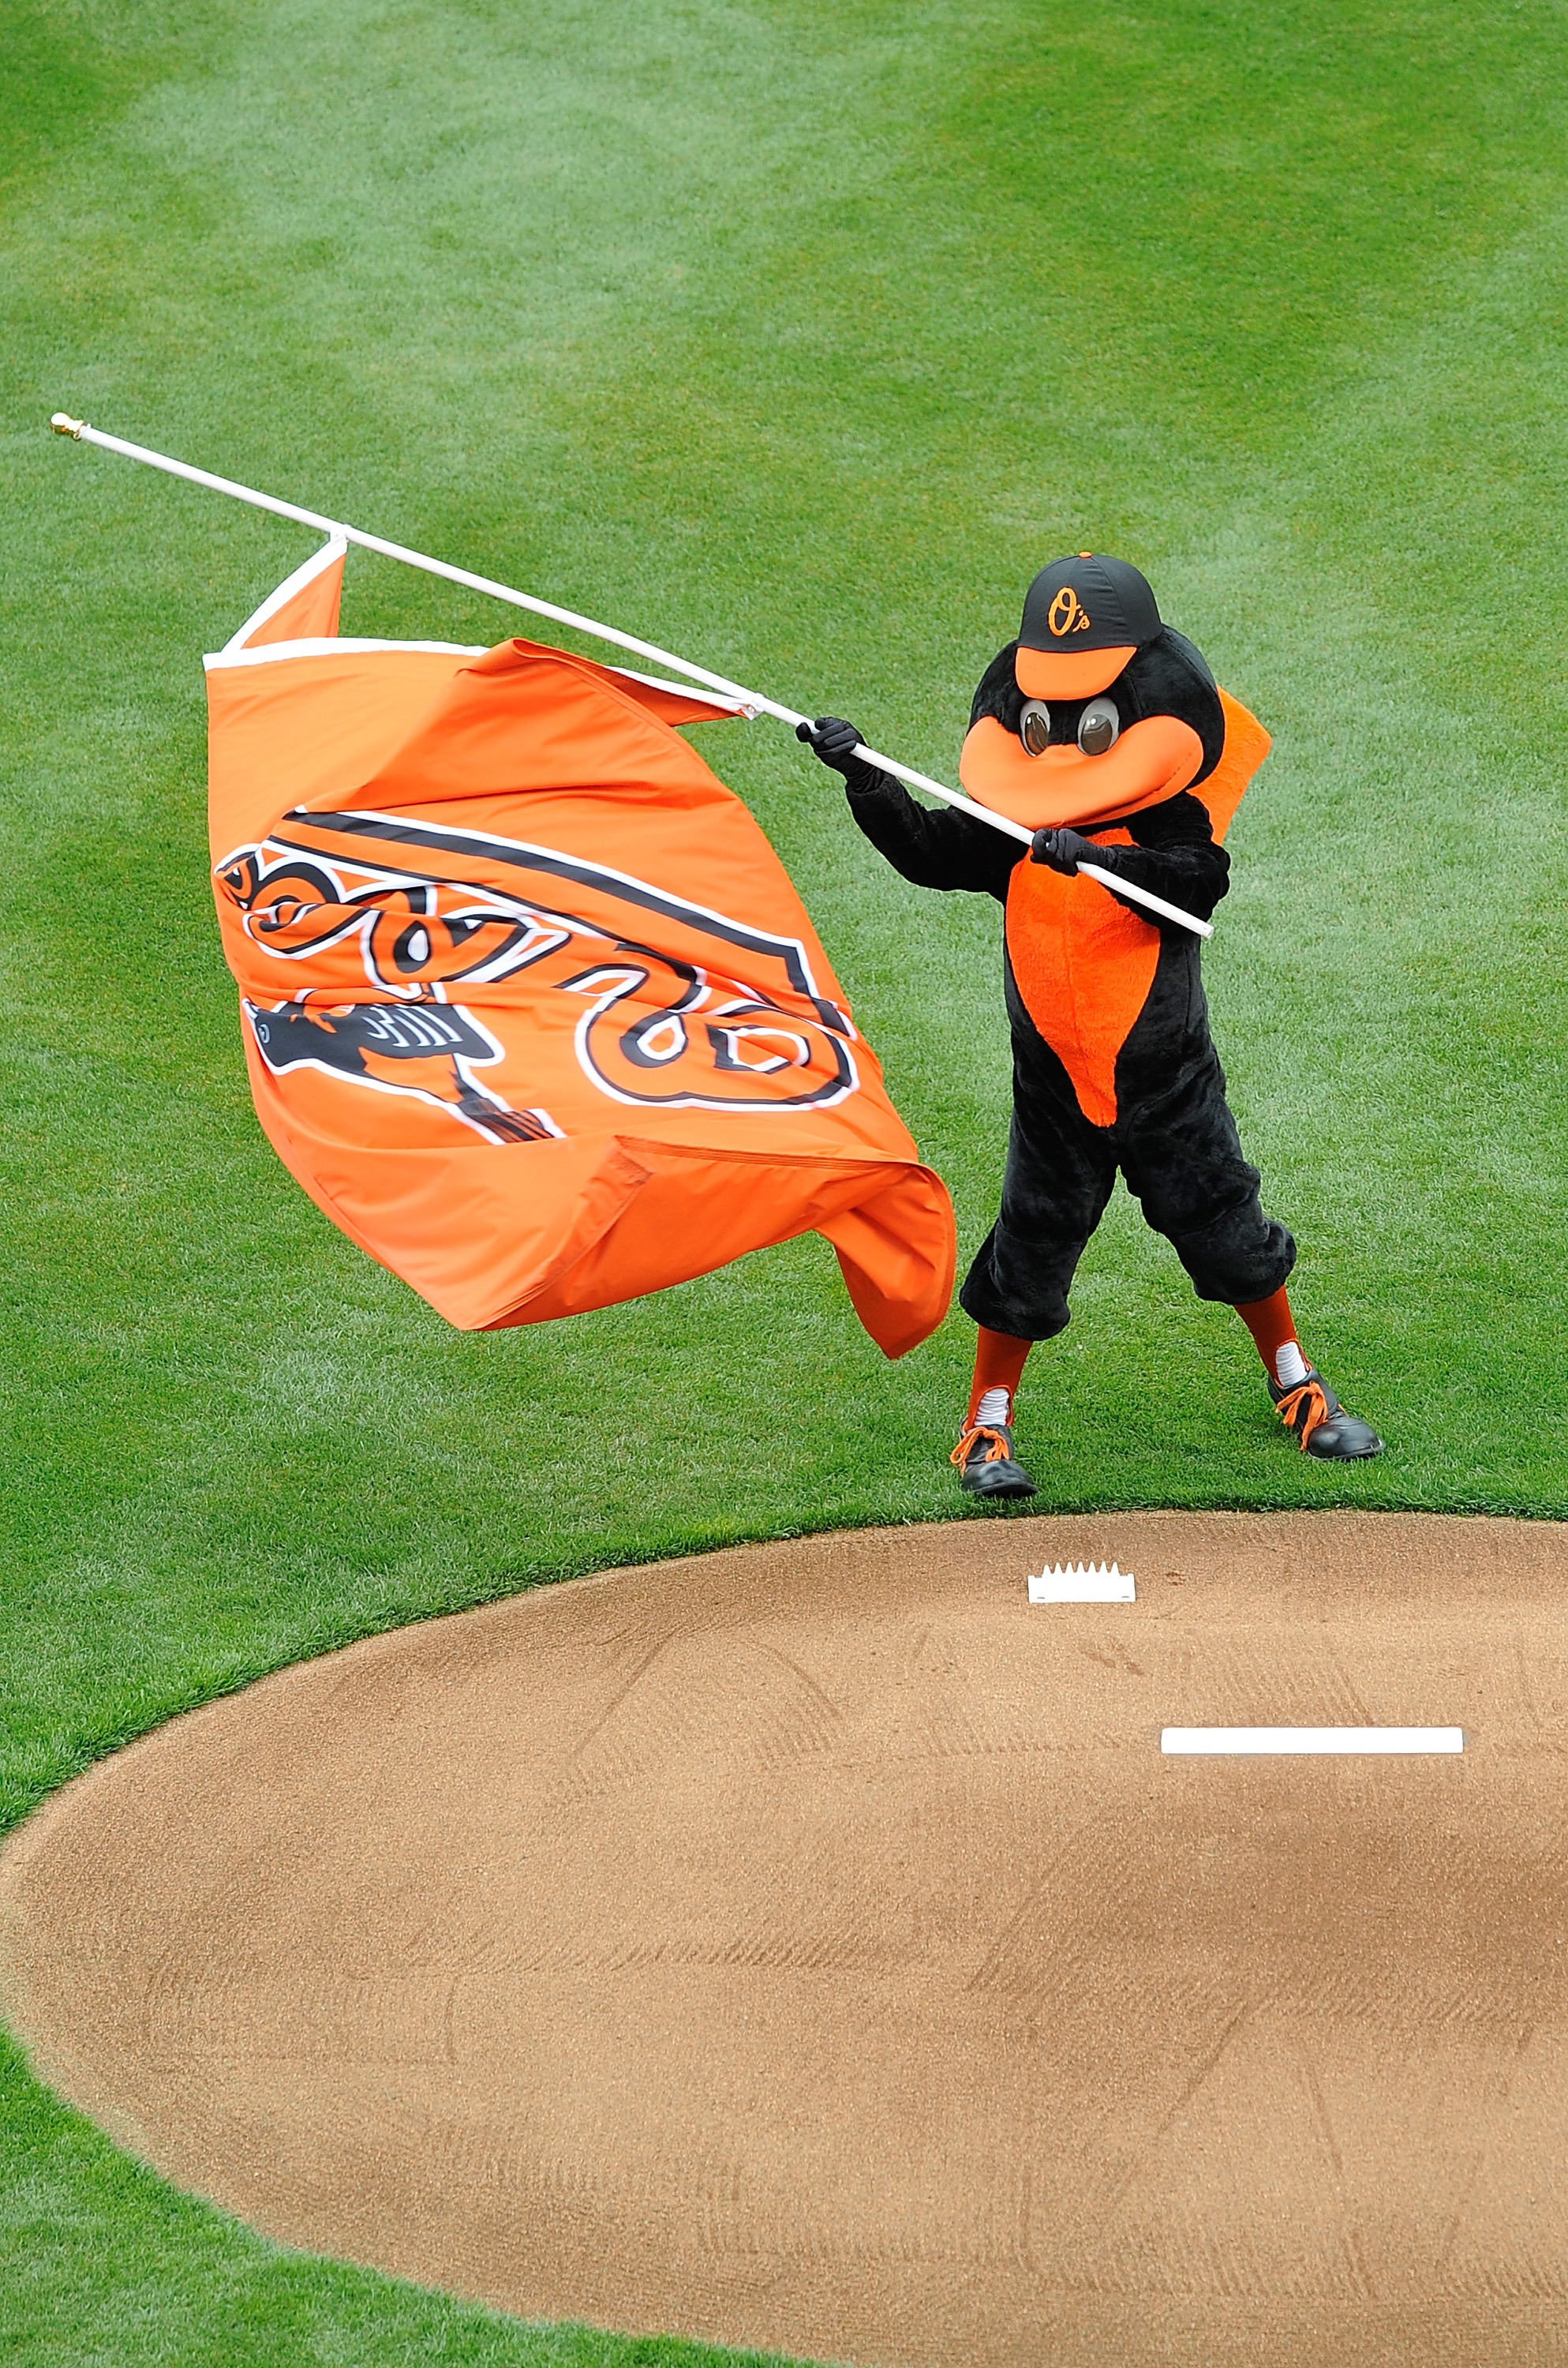 BALTIMORE - APRIL 06:  The Orioles Mascot carries a flag before the game between the Baltimore Orioles and the New York Yankees during opening day on April 6, 2009 at Camden Yards in Baltimore, Maryland.  (Photo by Greg Fiume/Getty Images)